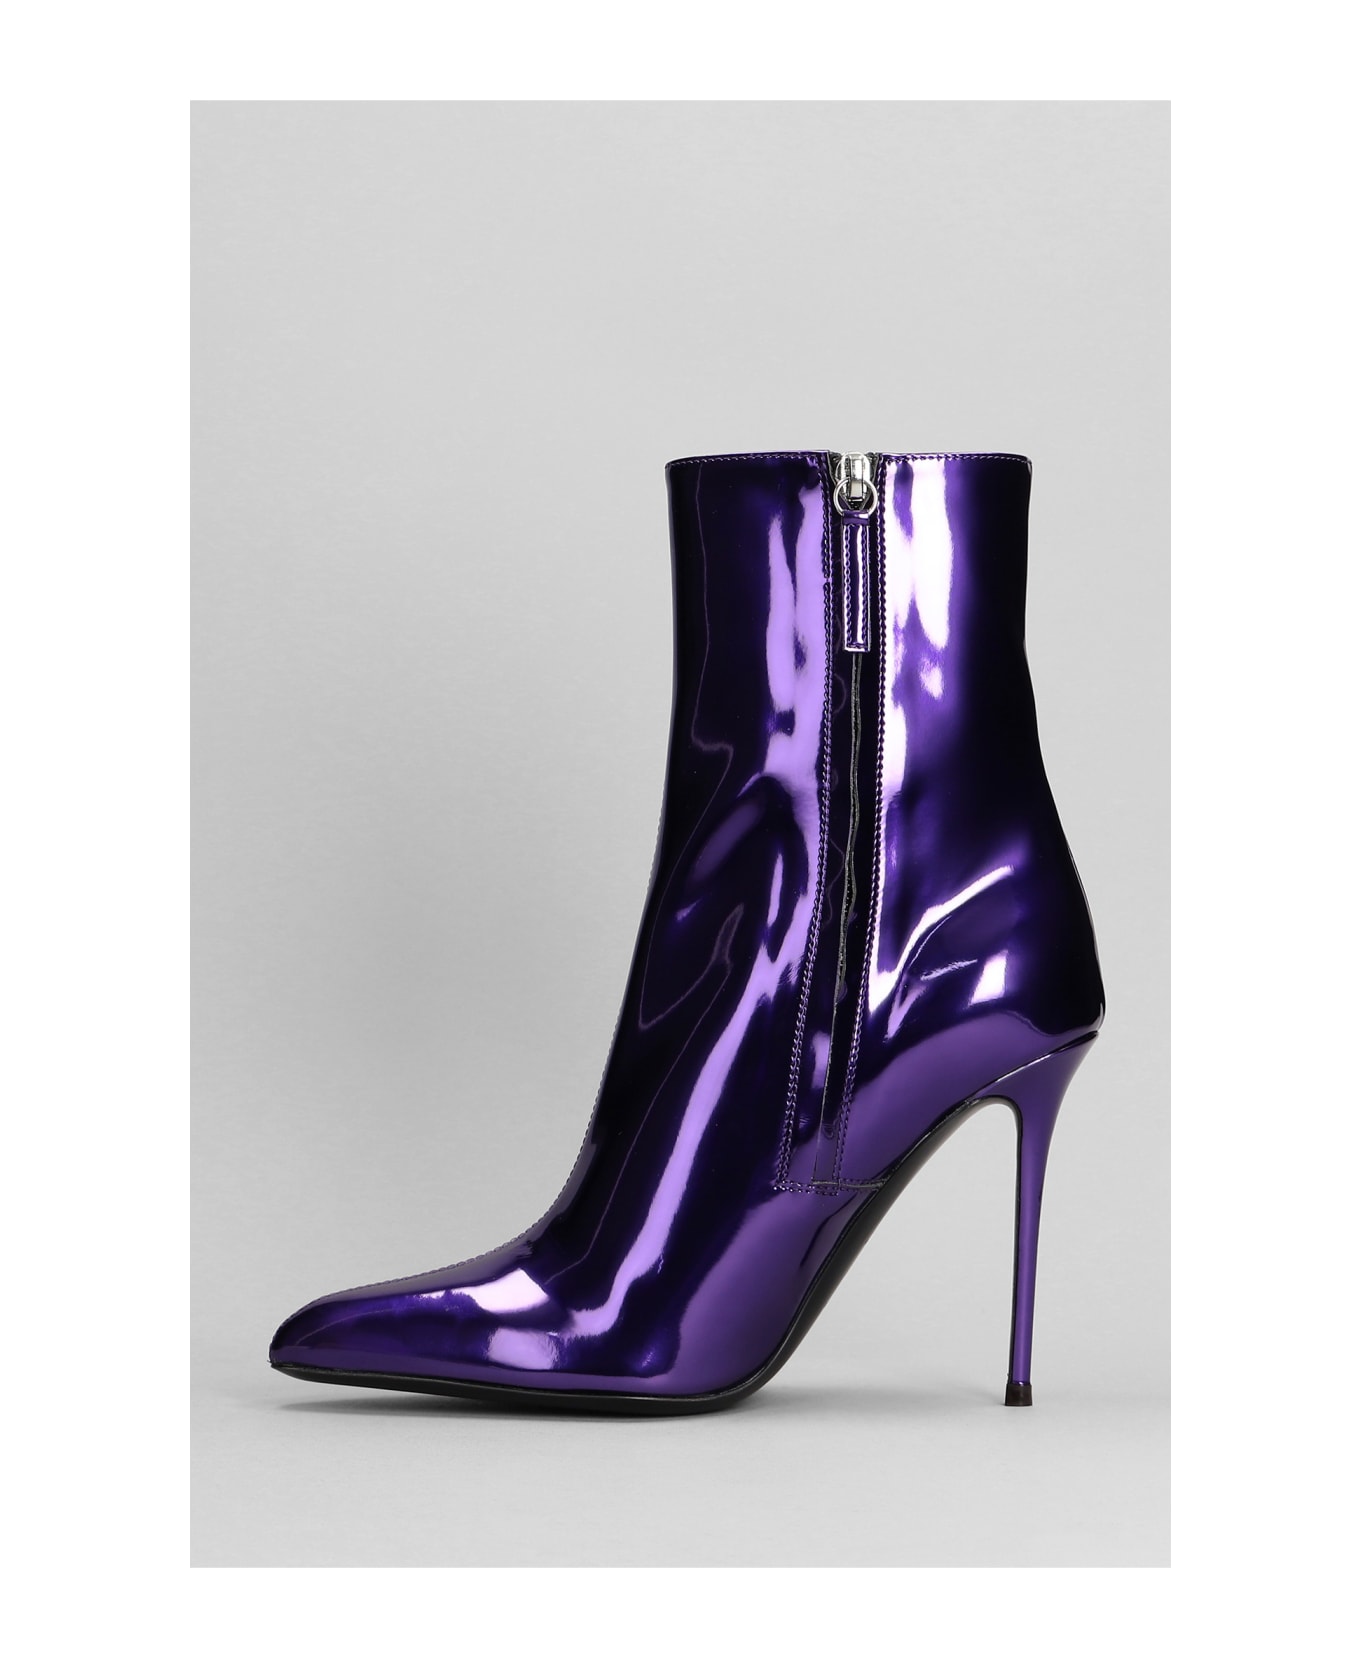 Giuseppe Zanotti Brytta High Heels Ankle Boots In Viola Patent Leather - Viola ブーツ